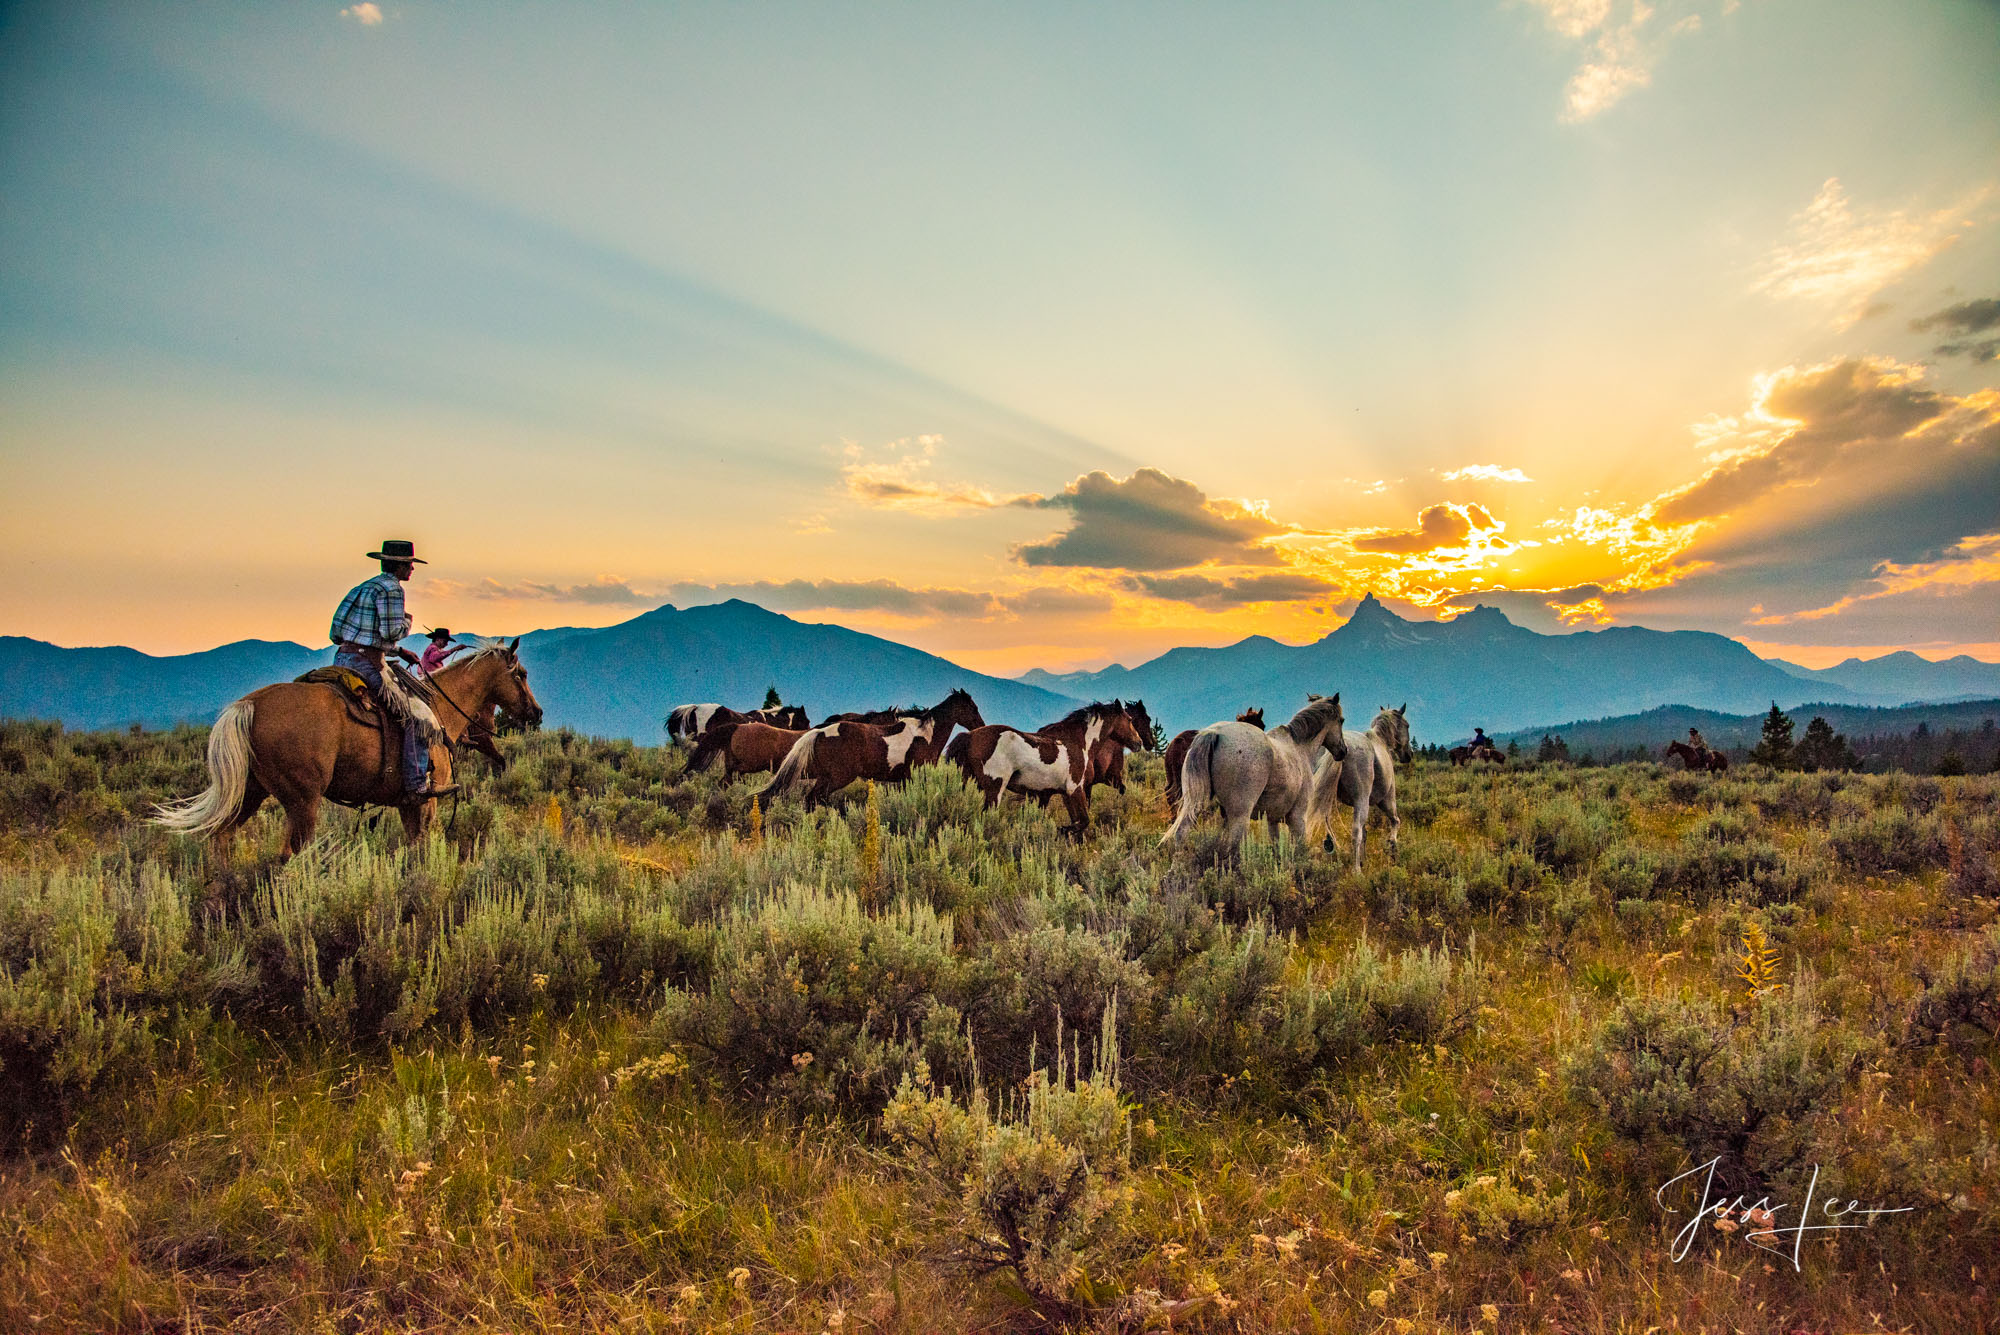 Cowboy Photos Fine Art Limited Edition Photography of Cowboys, Horses and life in the West. Wyoming cowboy pictured on horseback...